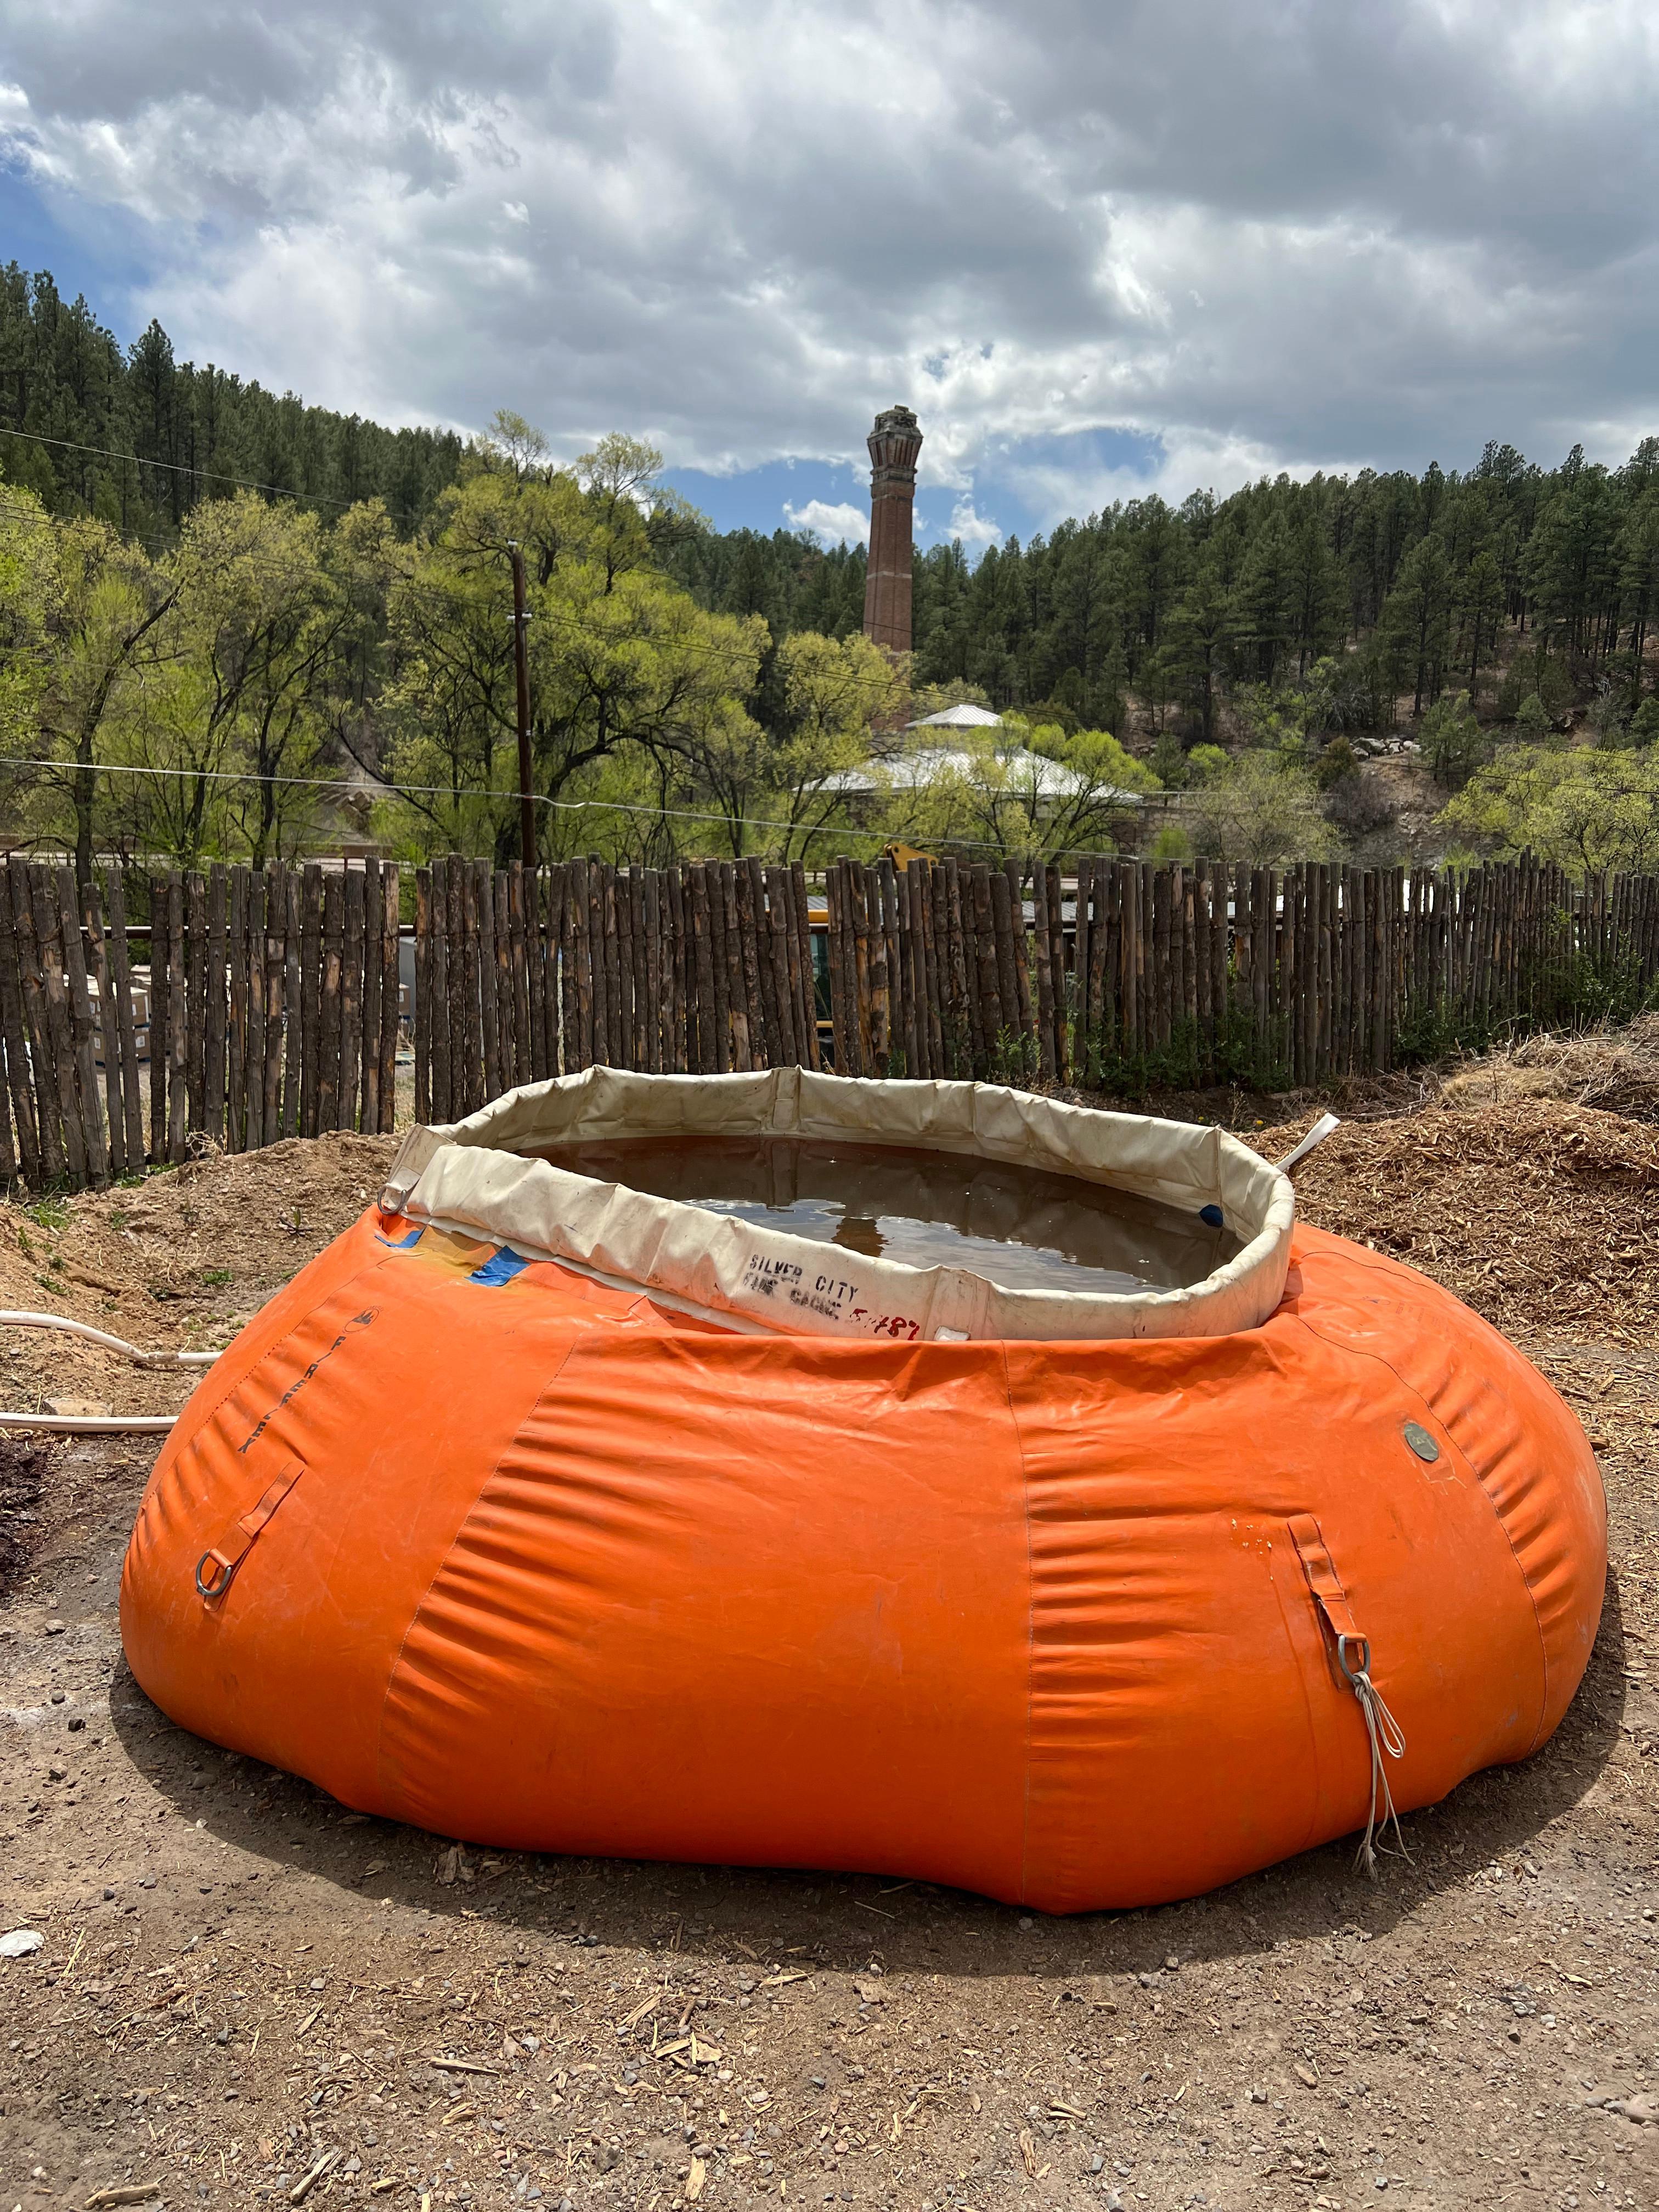 Water capture basin for firefighter use called a pumpkin